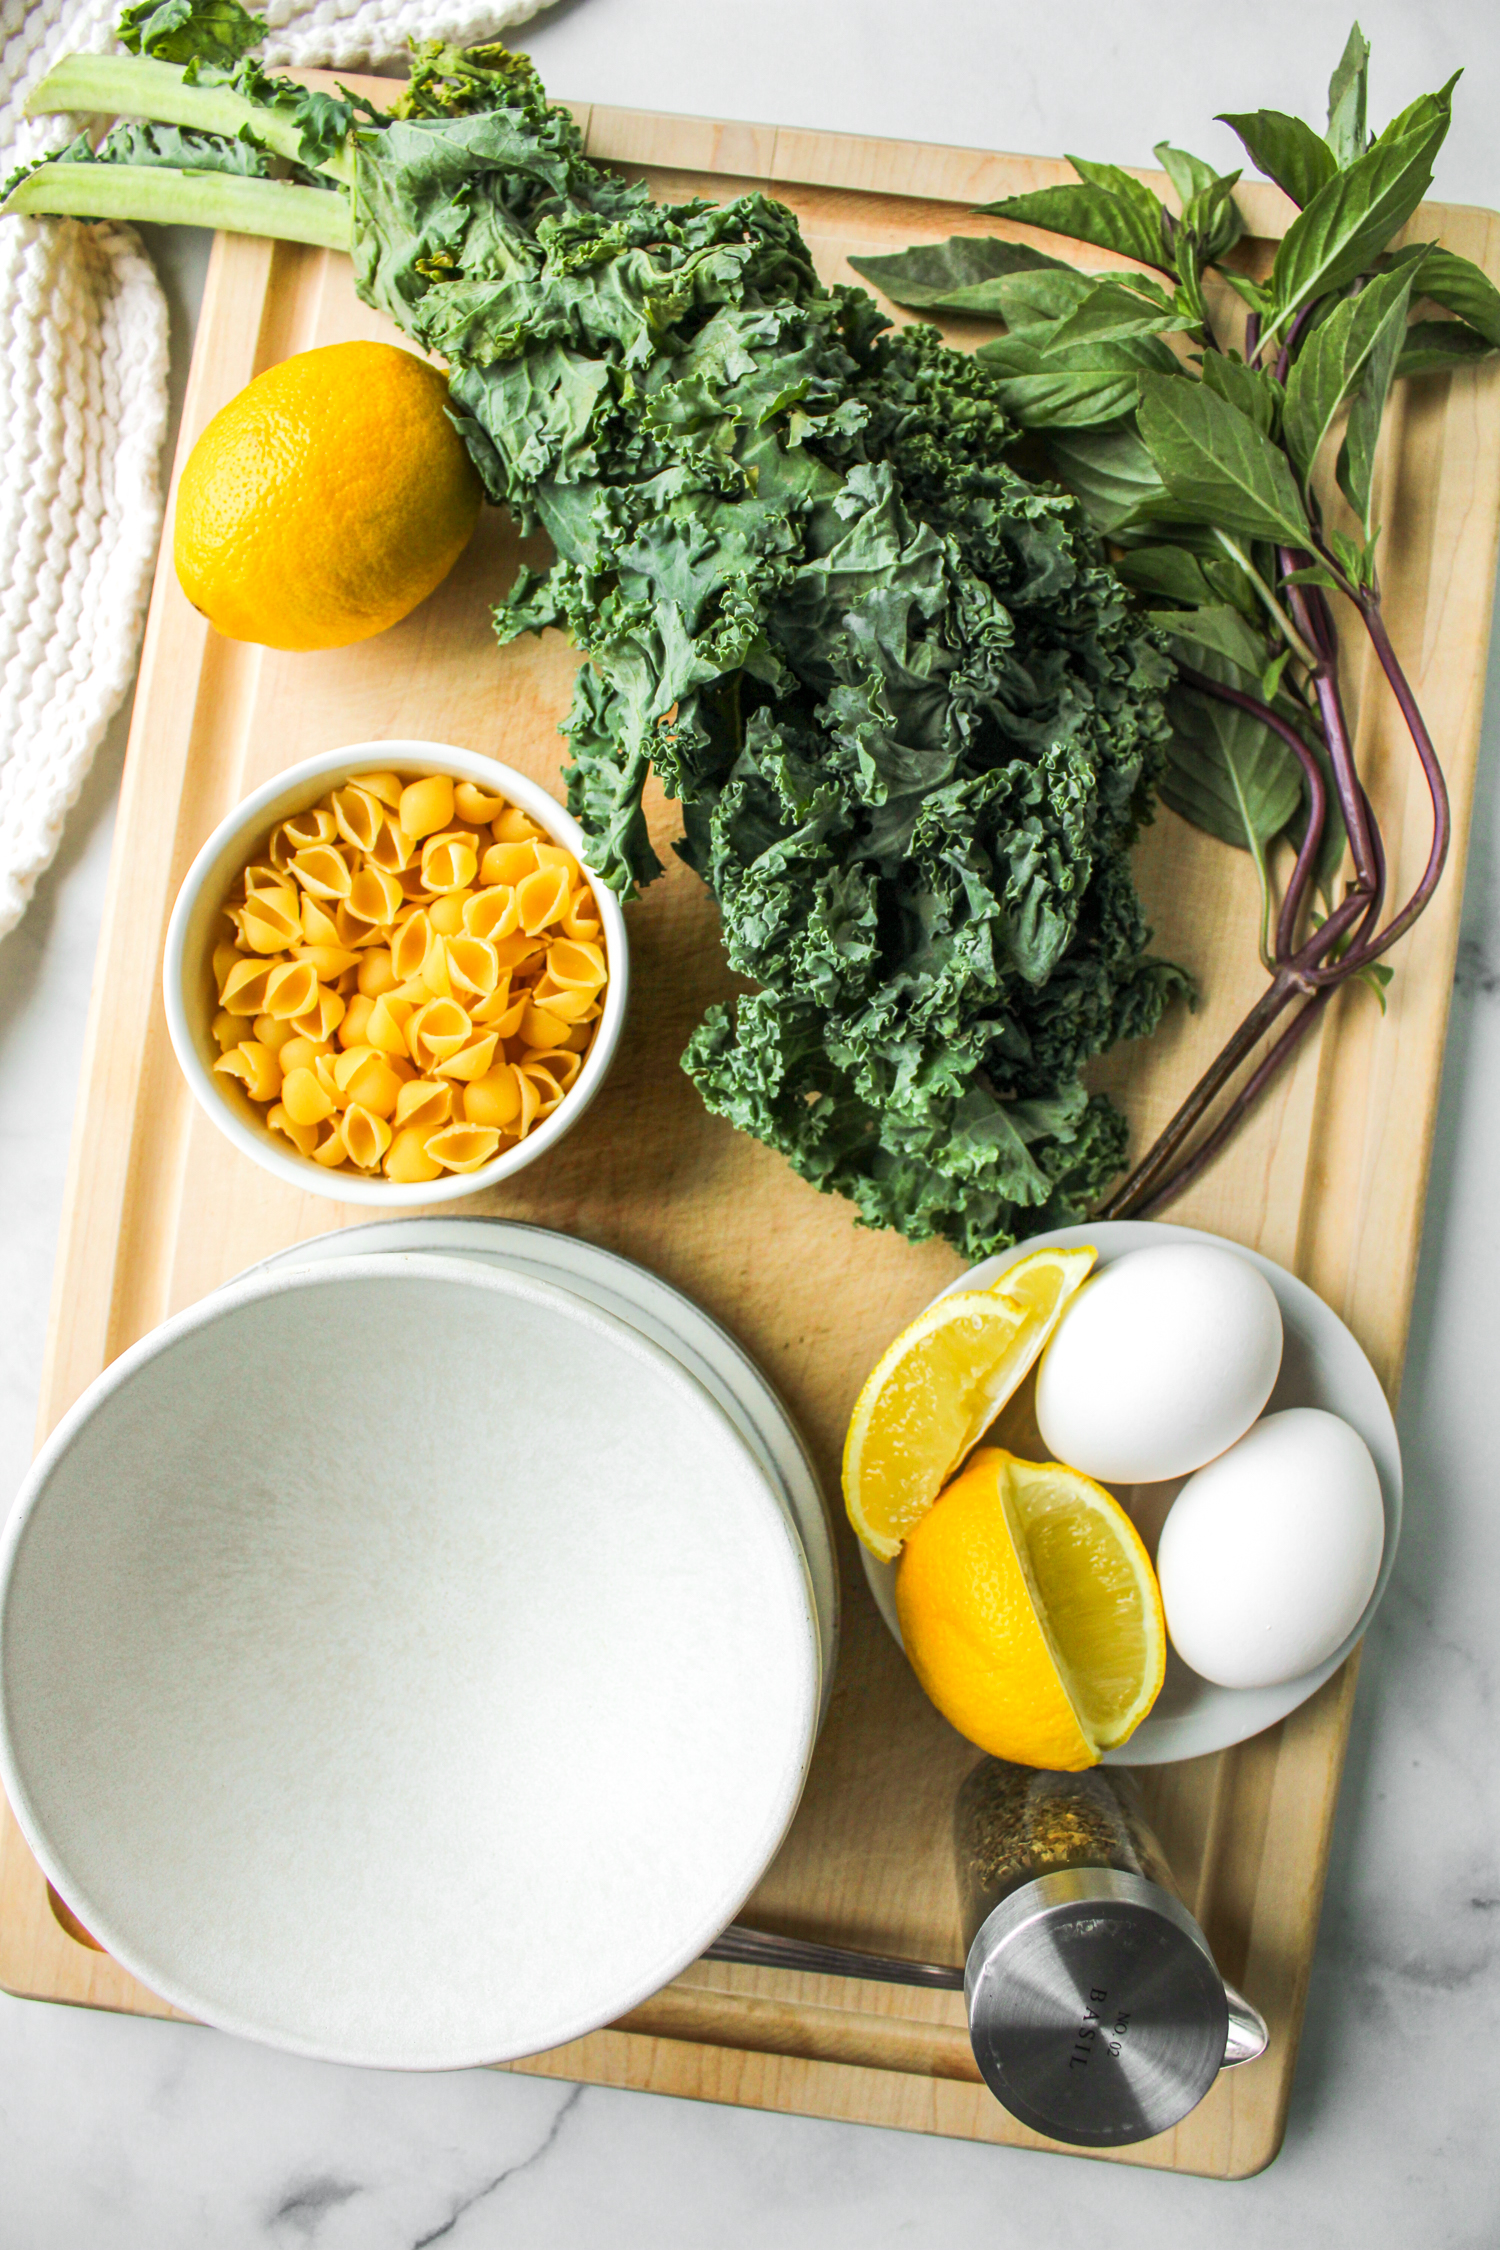 soup ingredients such as kale, basil, pasta shells, eggs, and lemon, displayed on a wooden board